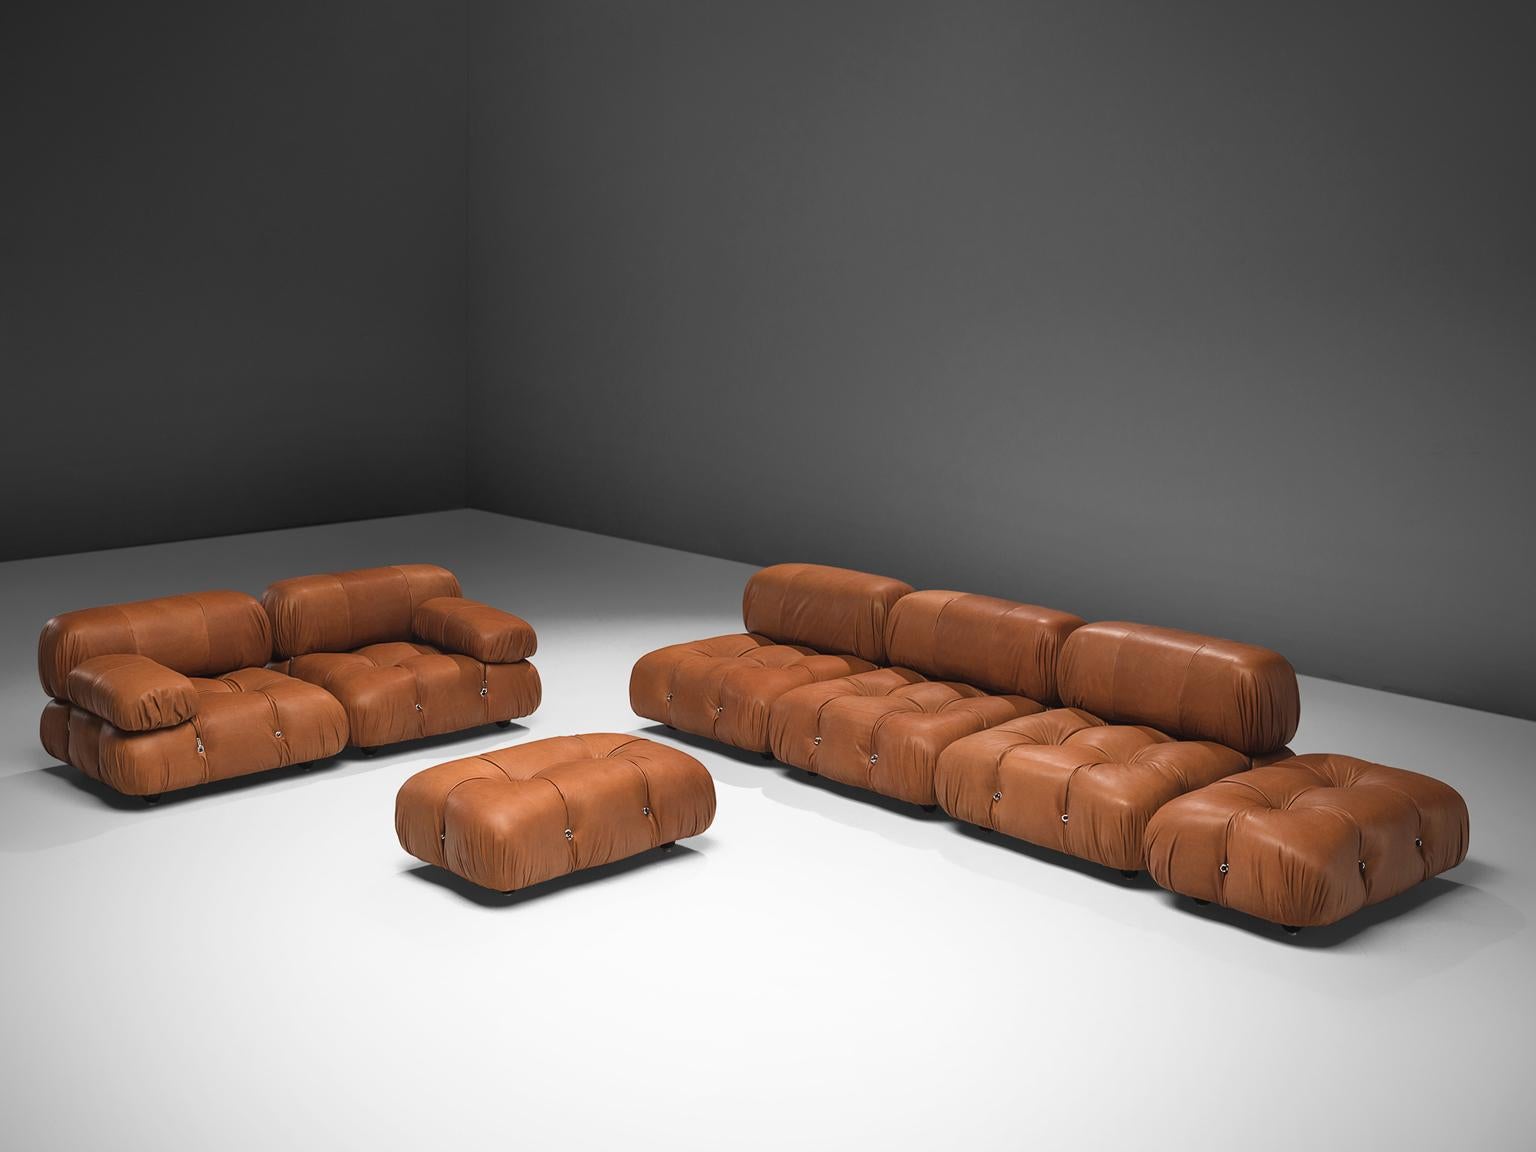 Mario Bellini, large modular 'Cameleonda' sofa, brown leather upholstery, Italy, 1971, reupholstered by our in-house upholstery atelier. 

The sectional elements of this sofa were made to be used freely and apart from one another. This sofa is